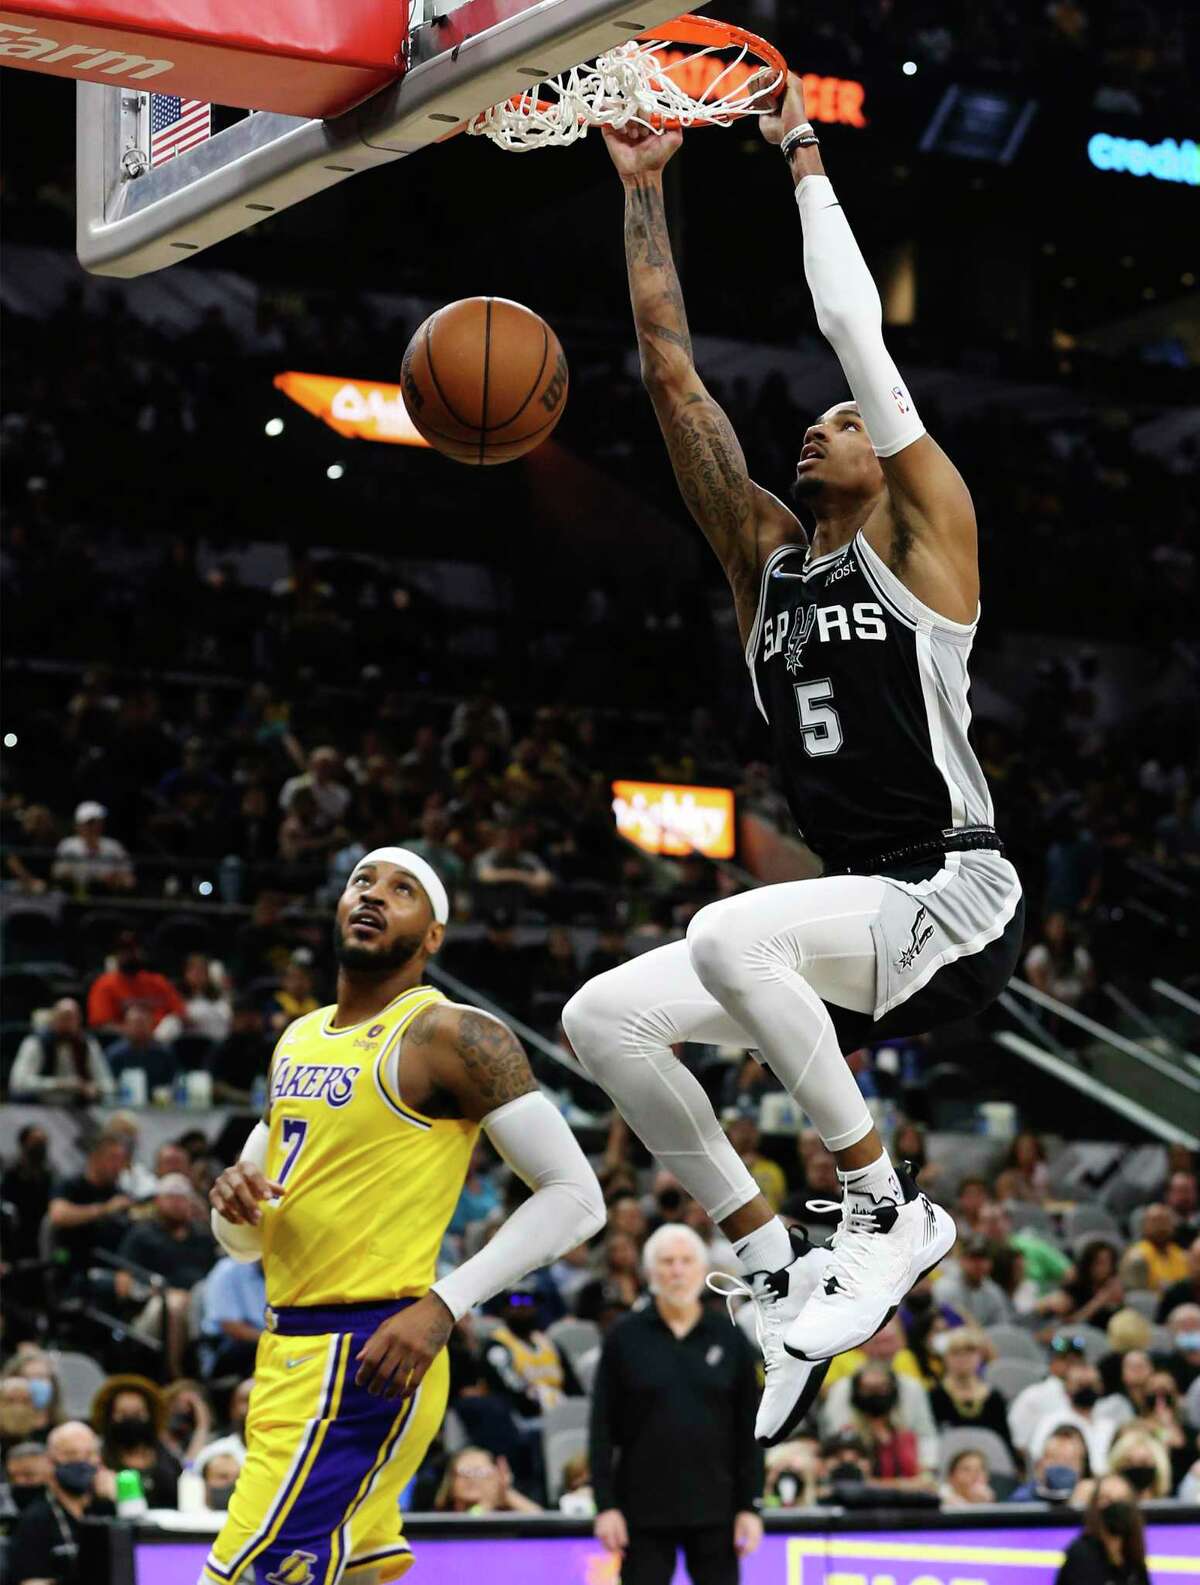 Spurs' Dejounte Murray (05) dunks against Lakers' Carmelo Anthony (07) in the first half at the AT&T Center on Tuesday, Oct. 26, 2021.